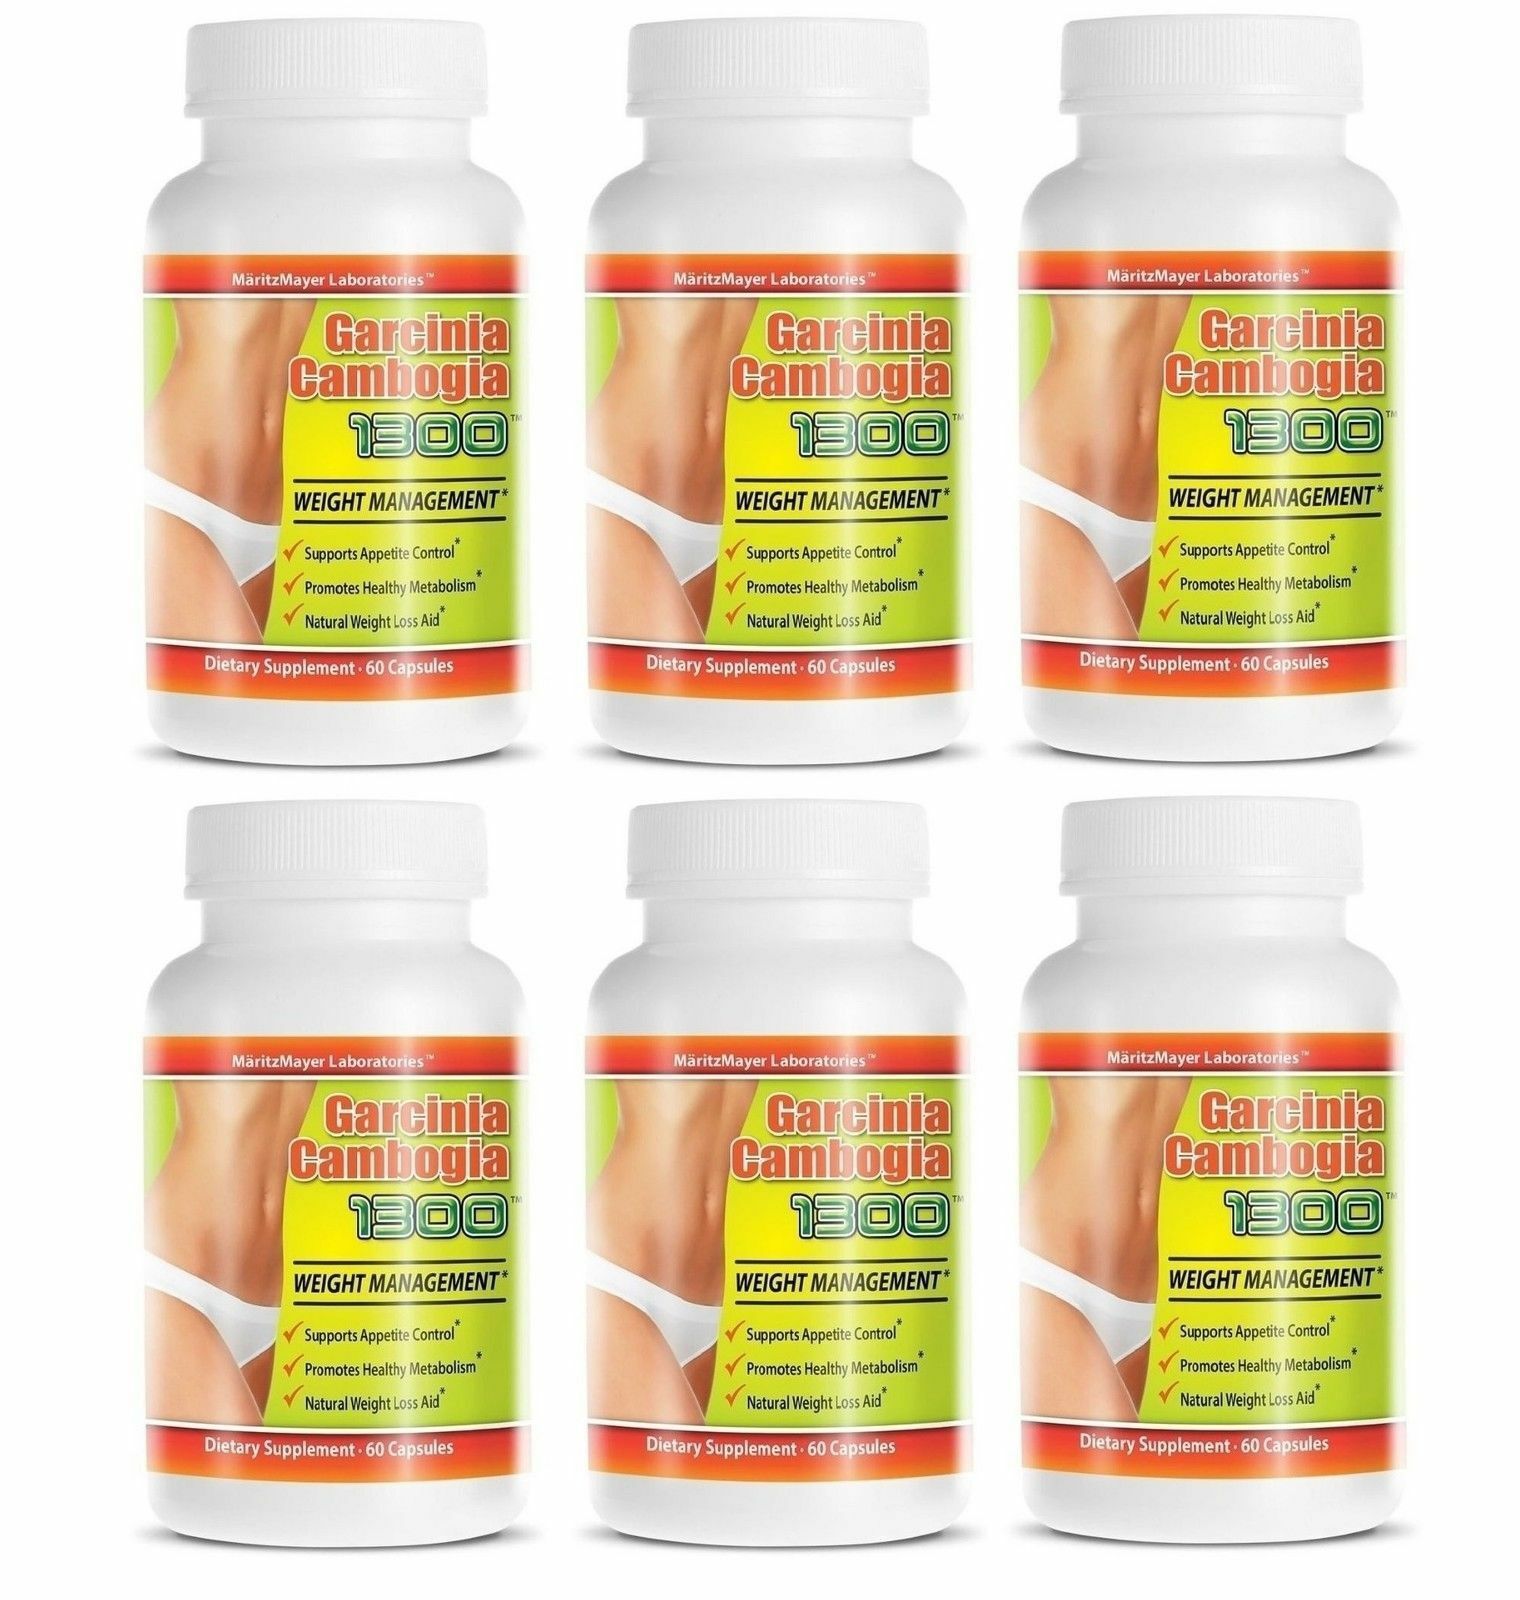 Primary image for Garcinia Cambogia Extract 1300 Weight Management Contains 60% HCA 6 Bottles